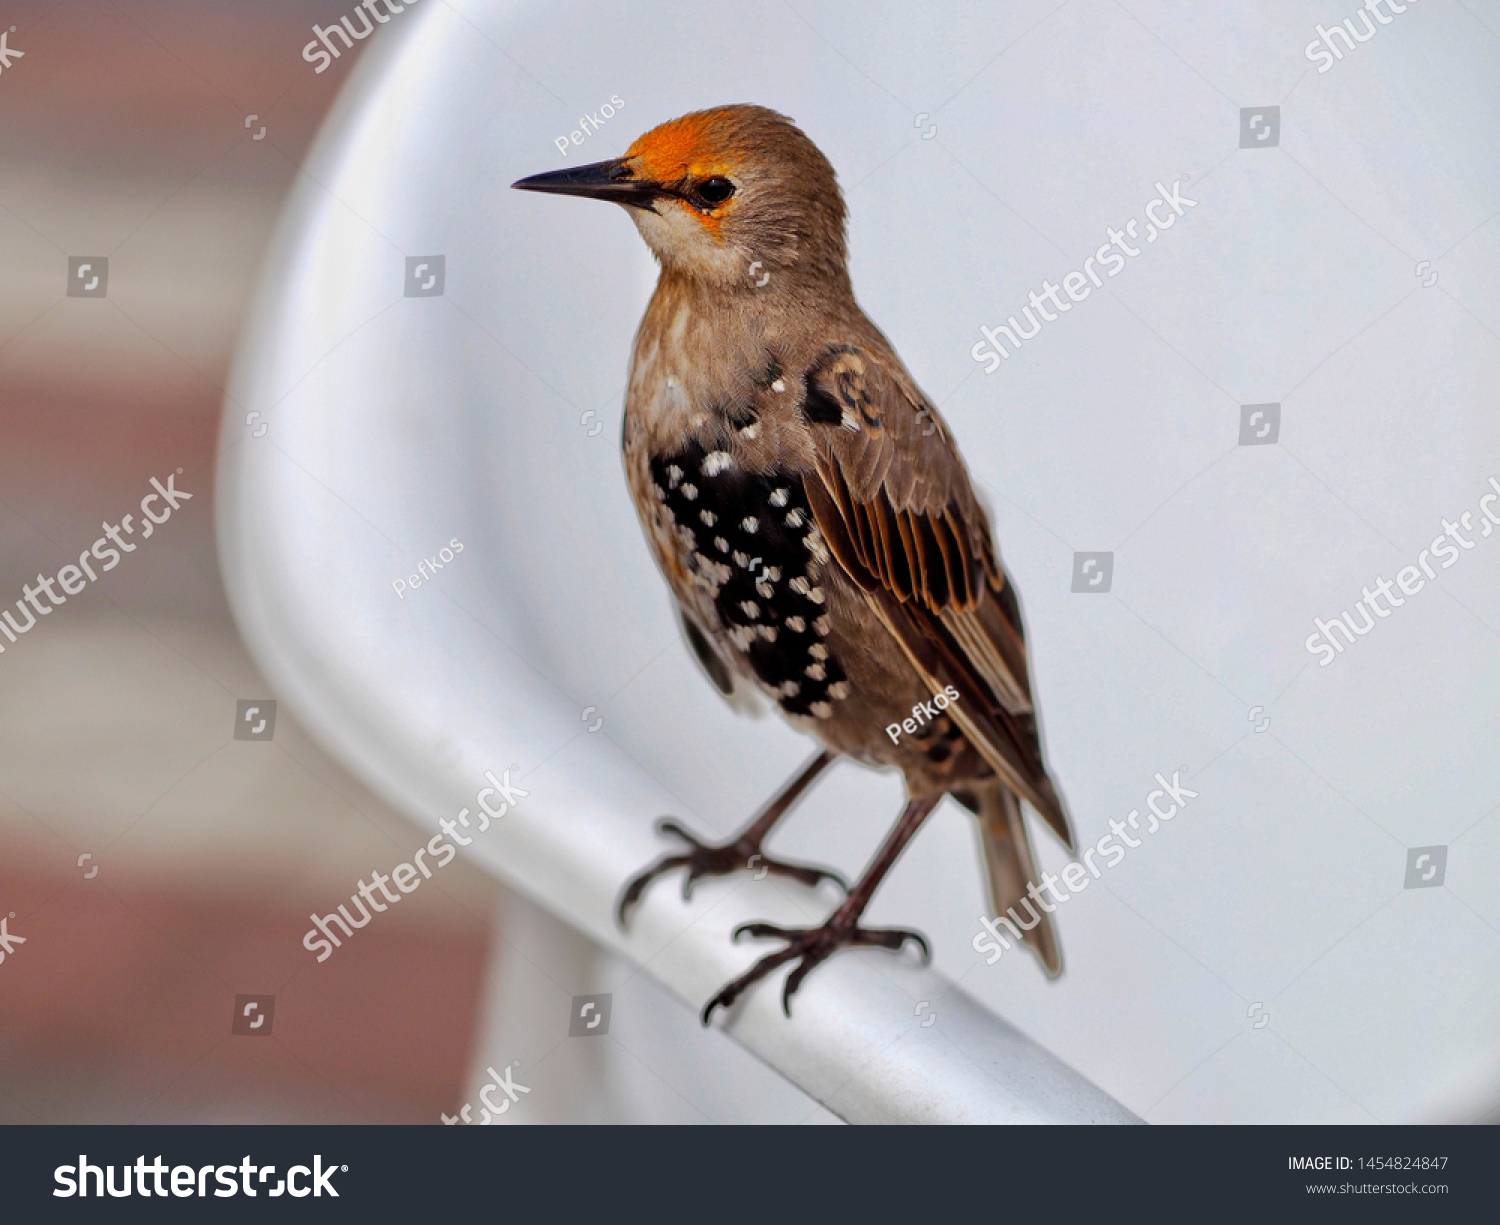 Juvenile Starling Perched on a Chair #1454824847